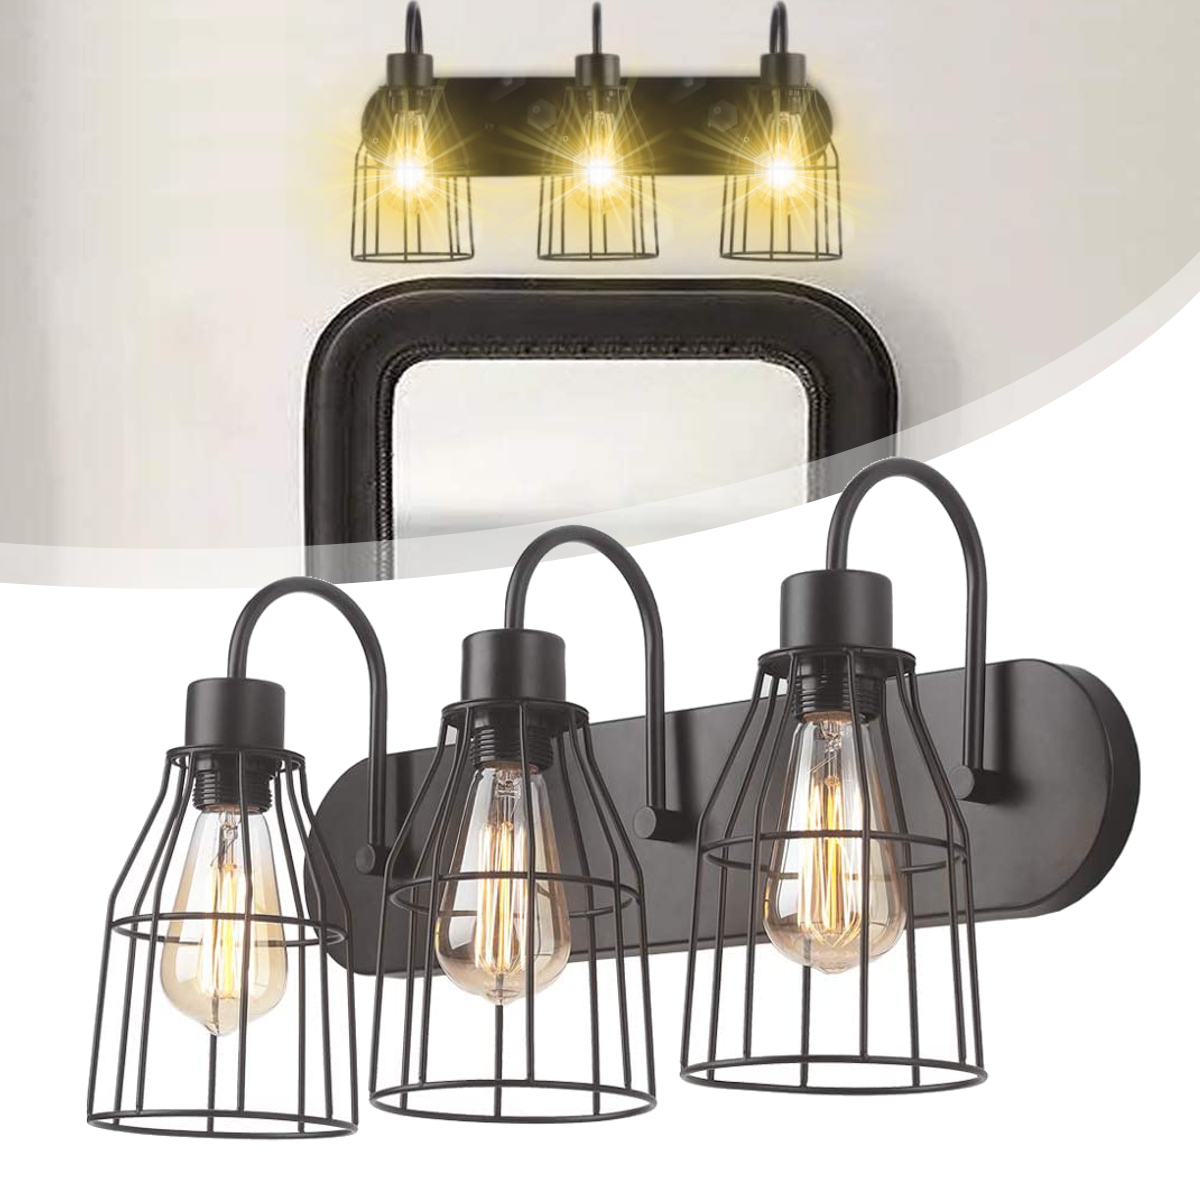 Find 3 Lamp Industrial Barn Wall Mount Lamp Retro Metal Sconce Light Fixture Without Bulb for Sale on Gipsybee.com with cryptocurrencies